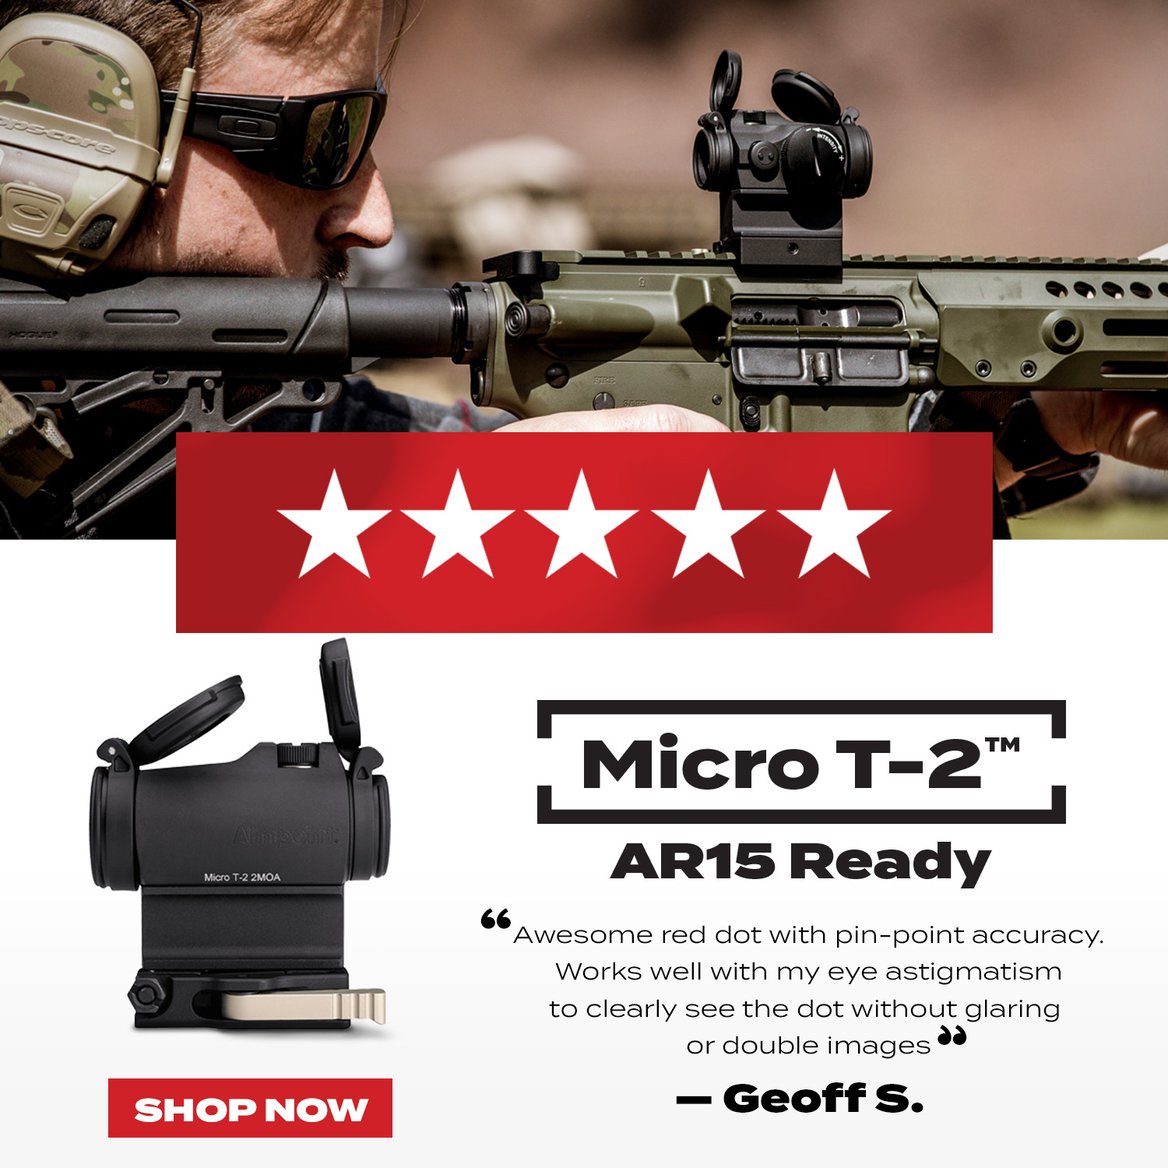 Micro T-2 Review